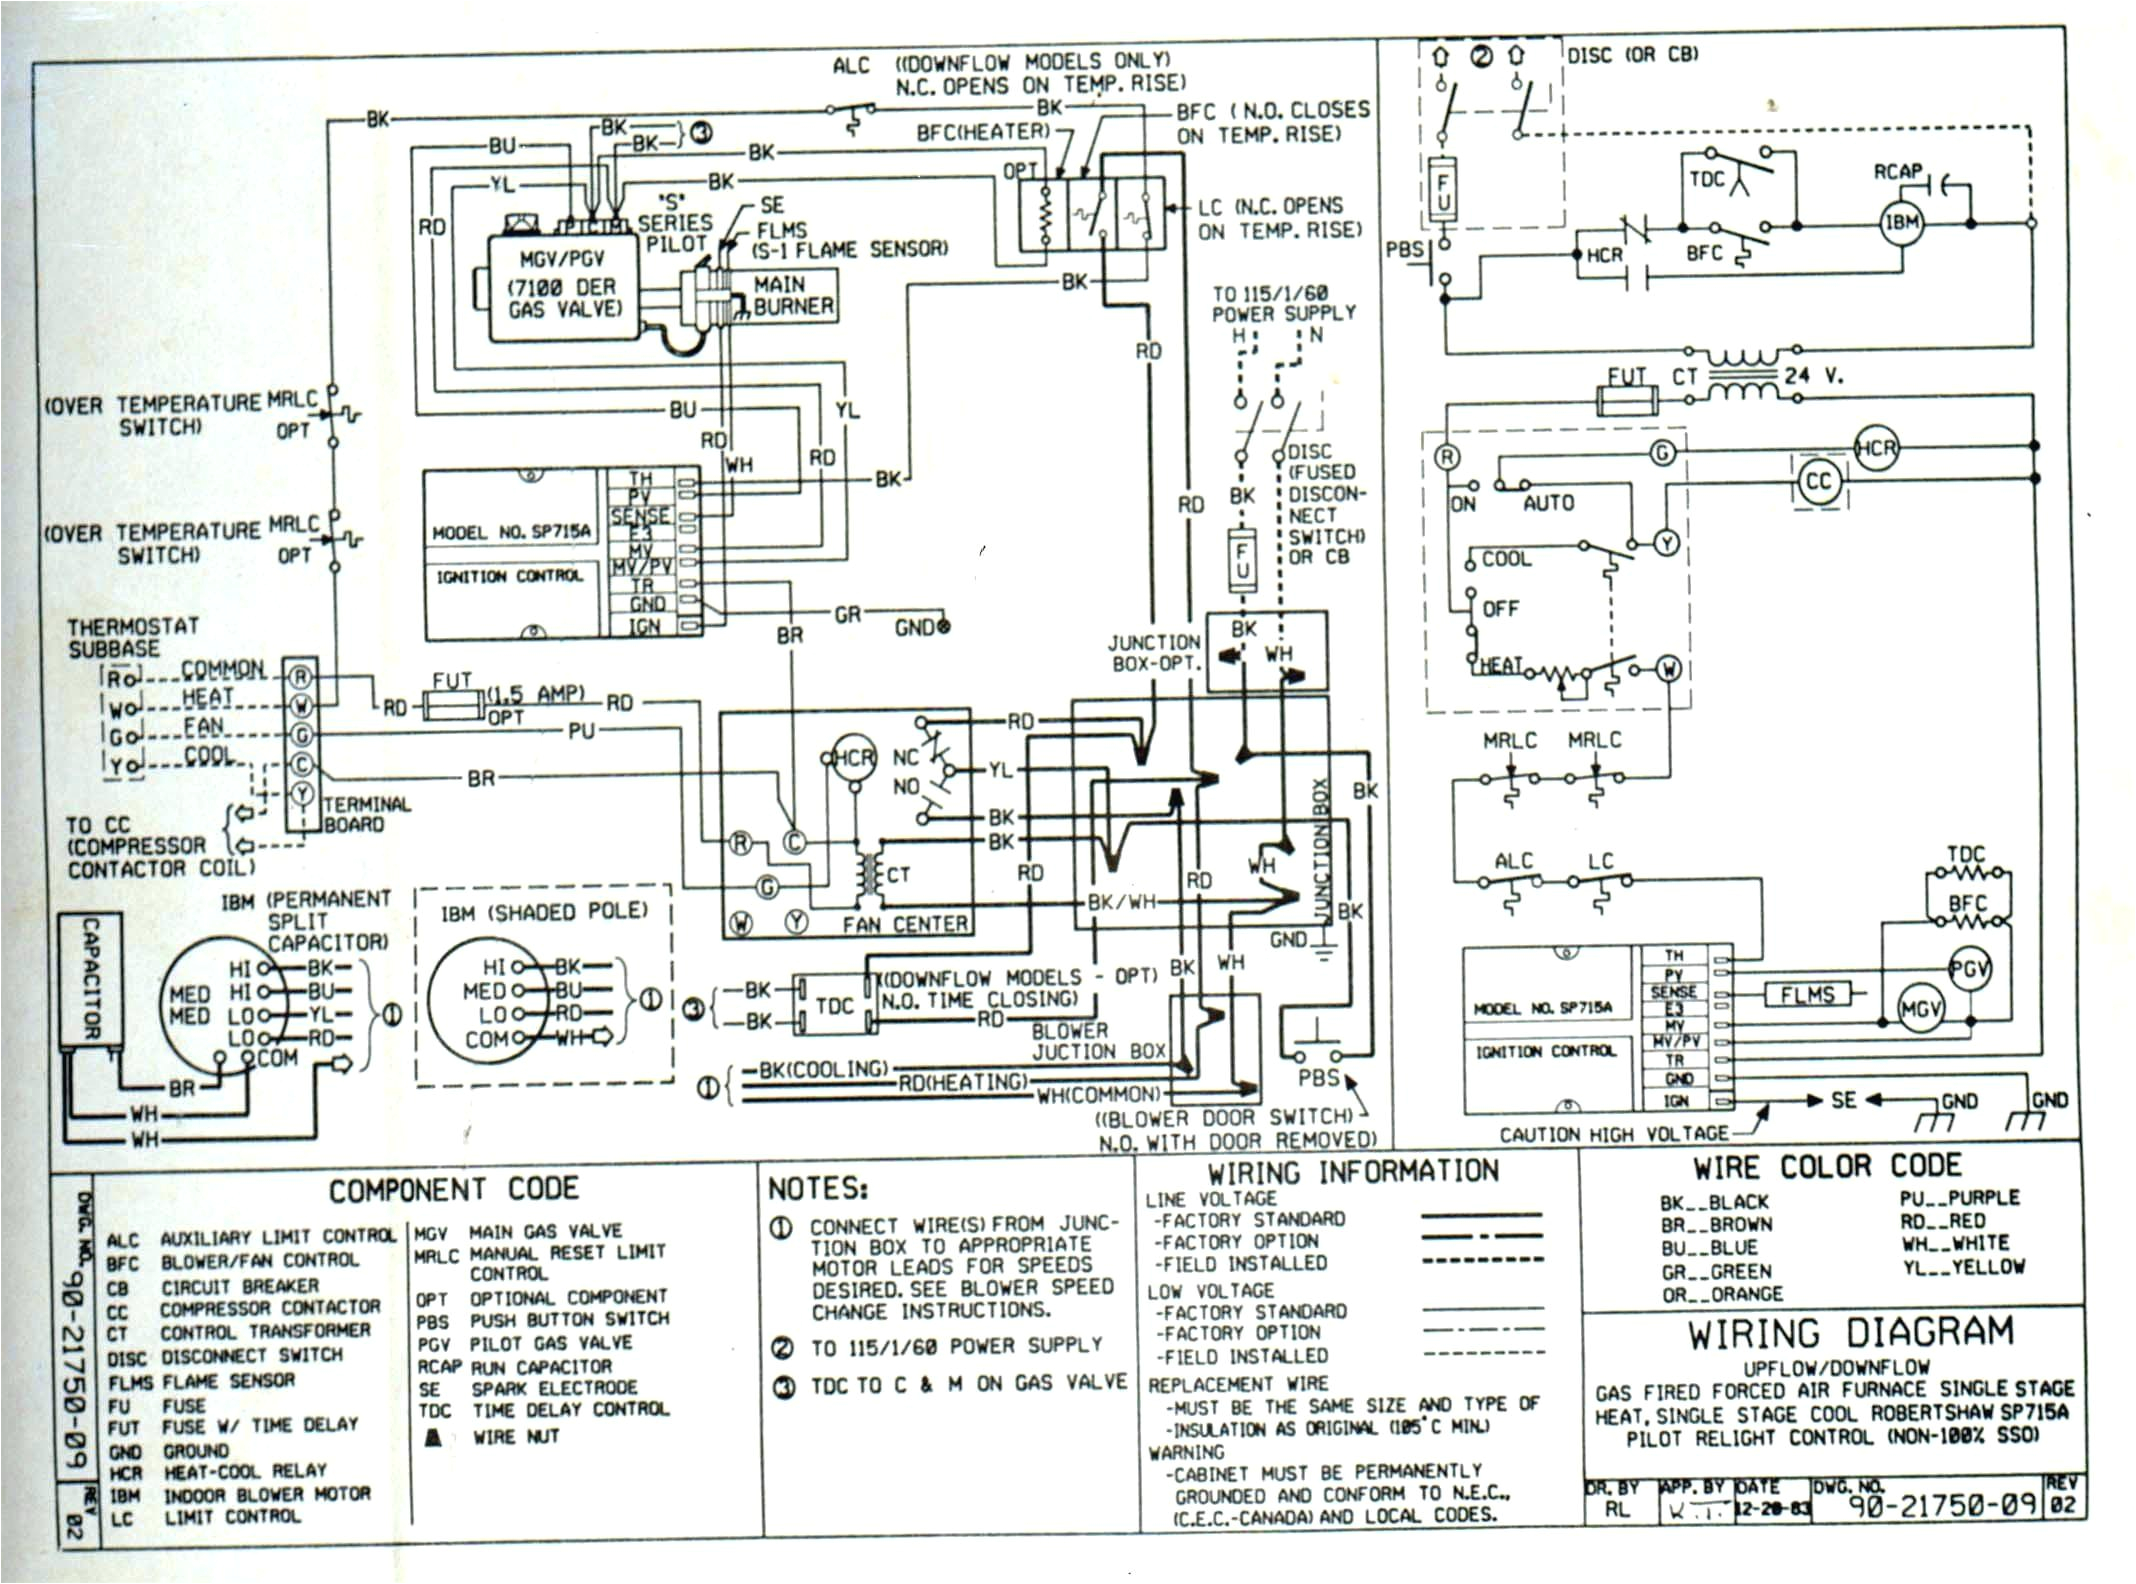 wiring diagram likewise carrier 3 ton package unit further trane 10 carrier rva c wiring diagram